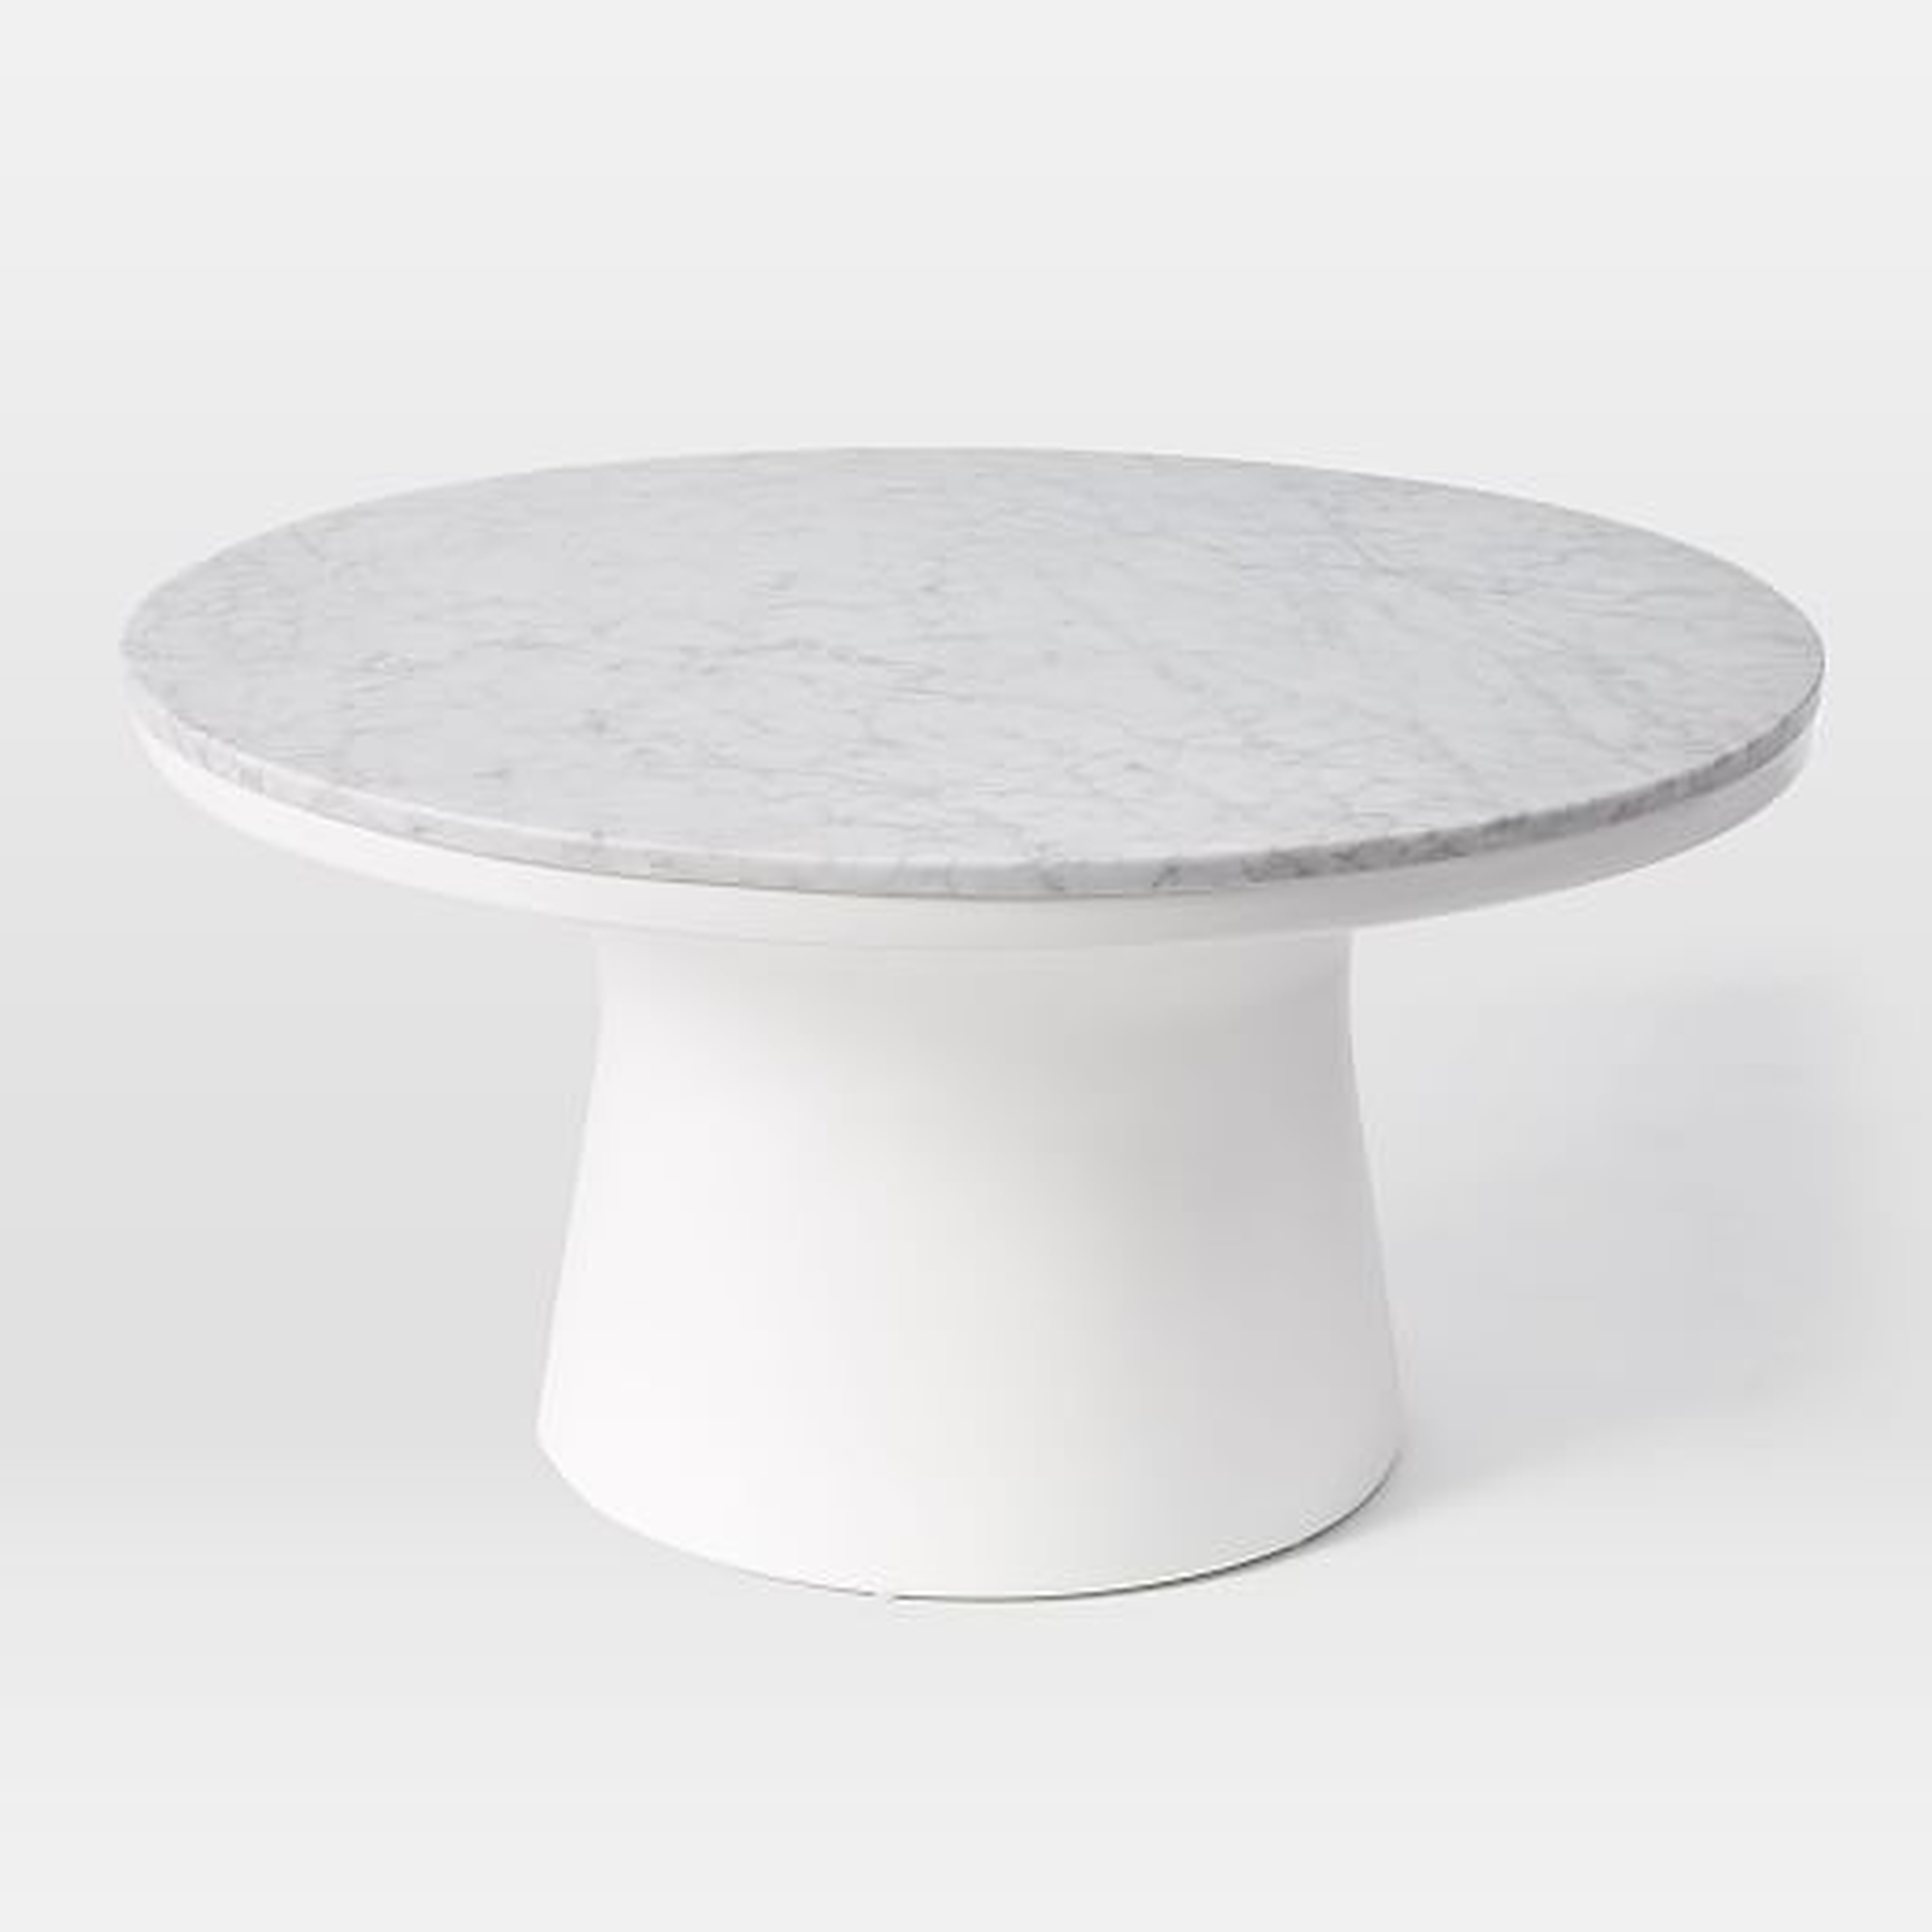 Marble-Topped Pedestal Coffee Table - White Marble/White - West Elm